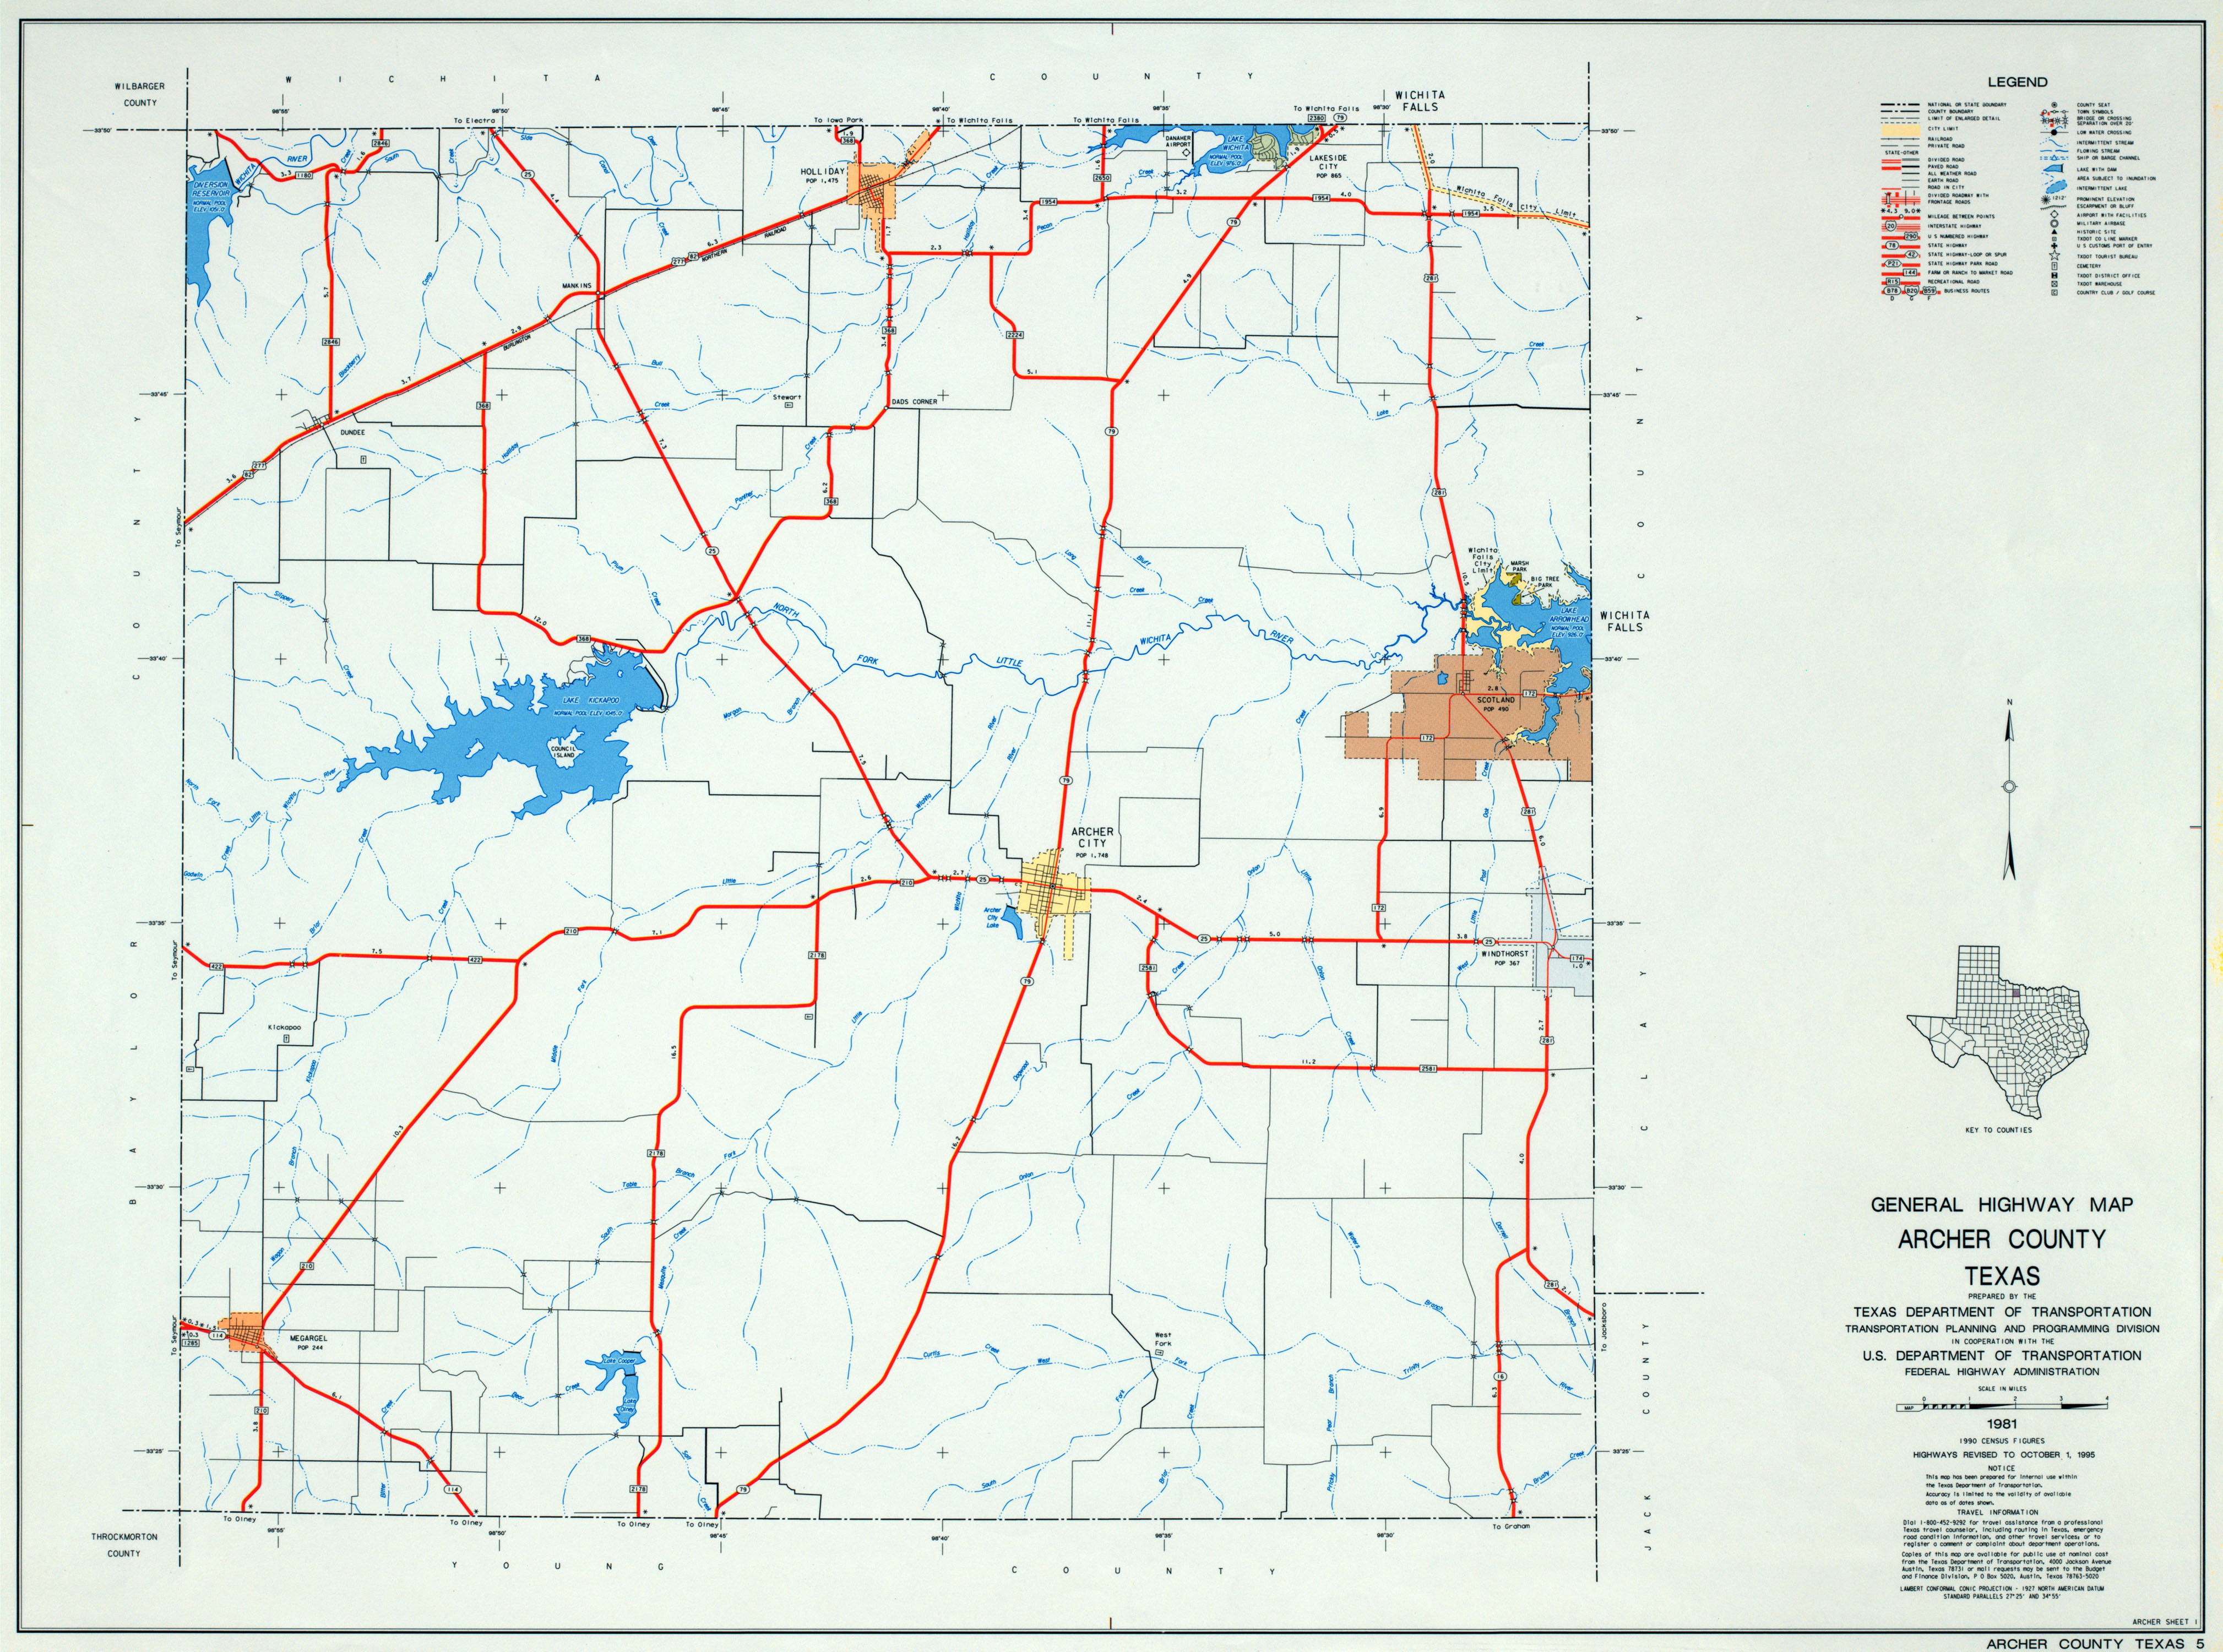 Texas County Highway Maps Browse - Perry-Castañeda Map Collection - Marion Texas Map